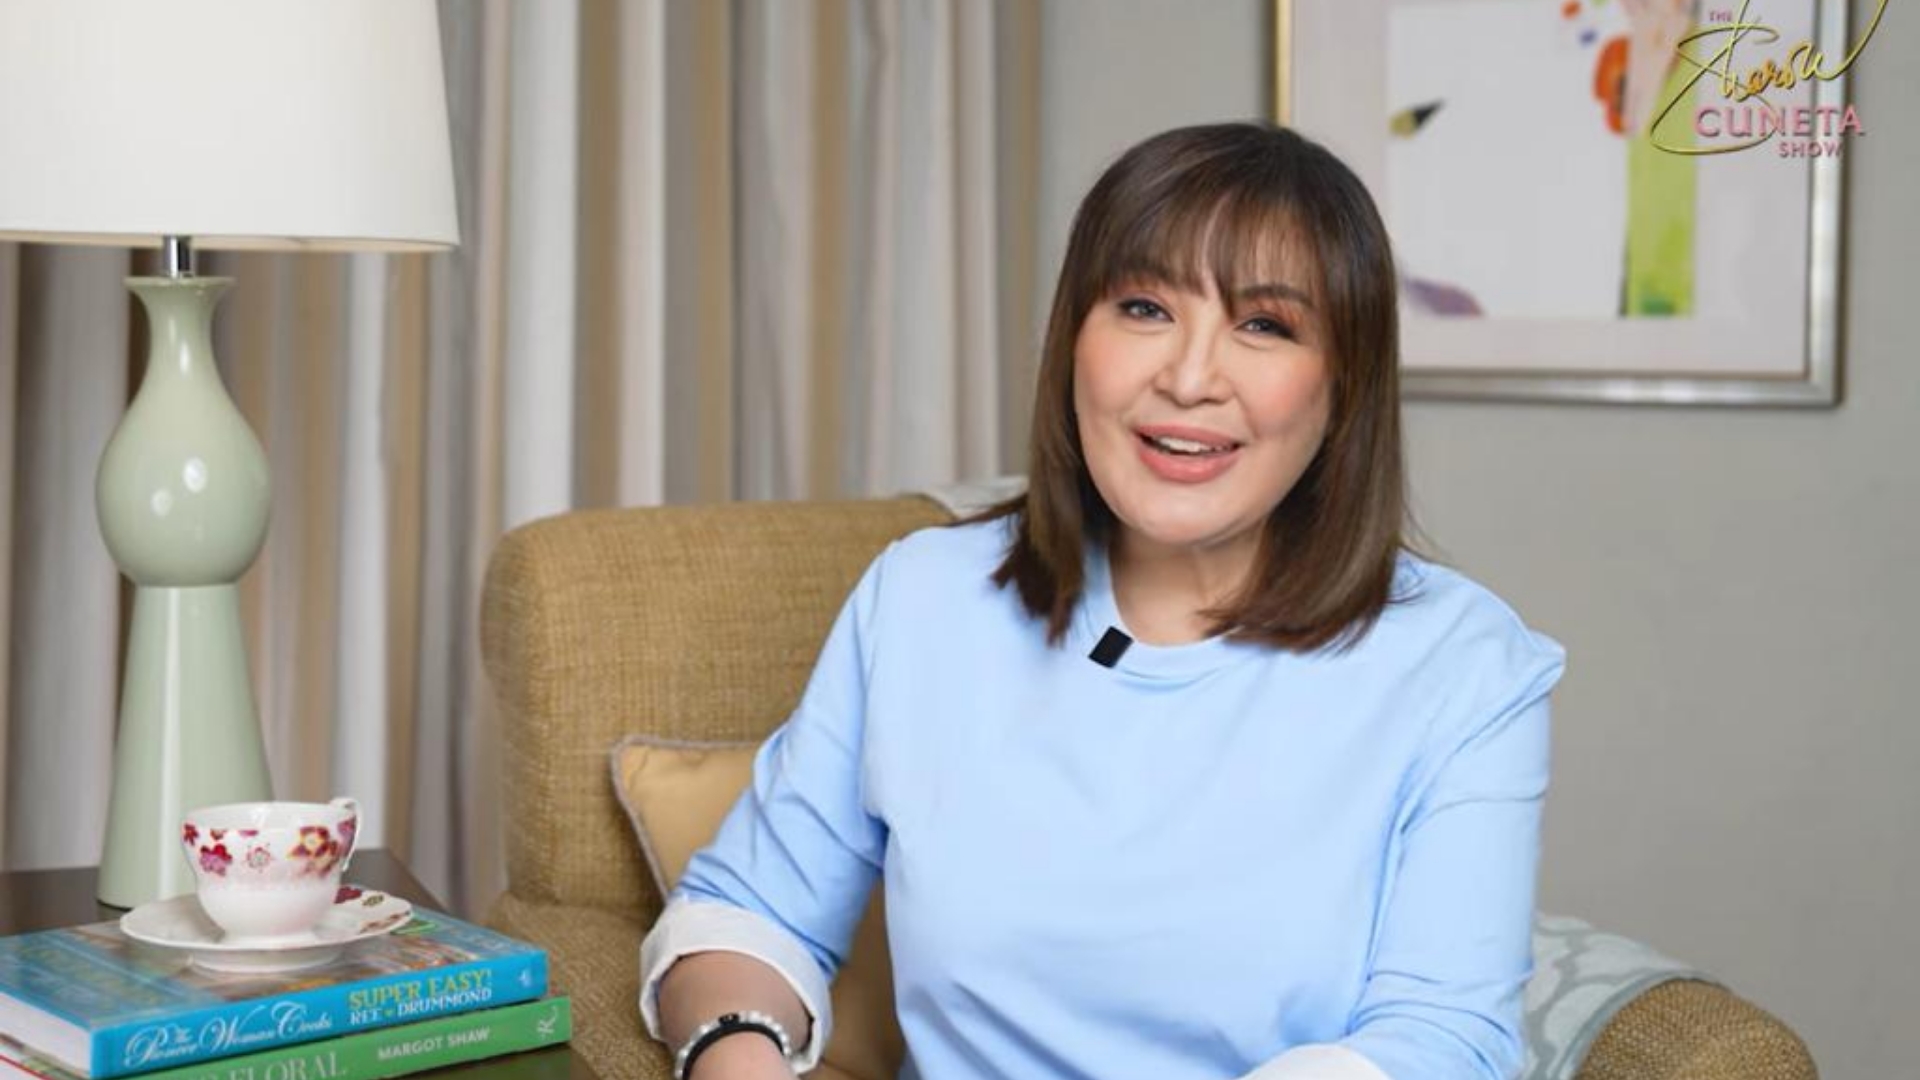 How to make millions while doing what you love, according to Sharon Cuneta